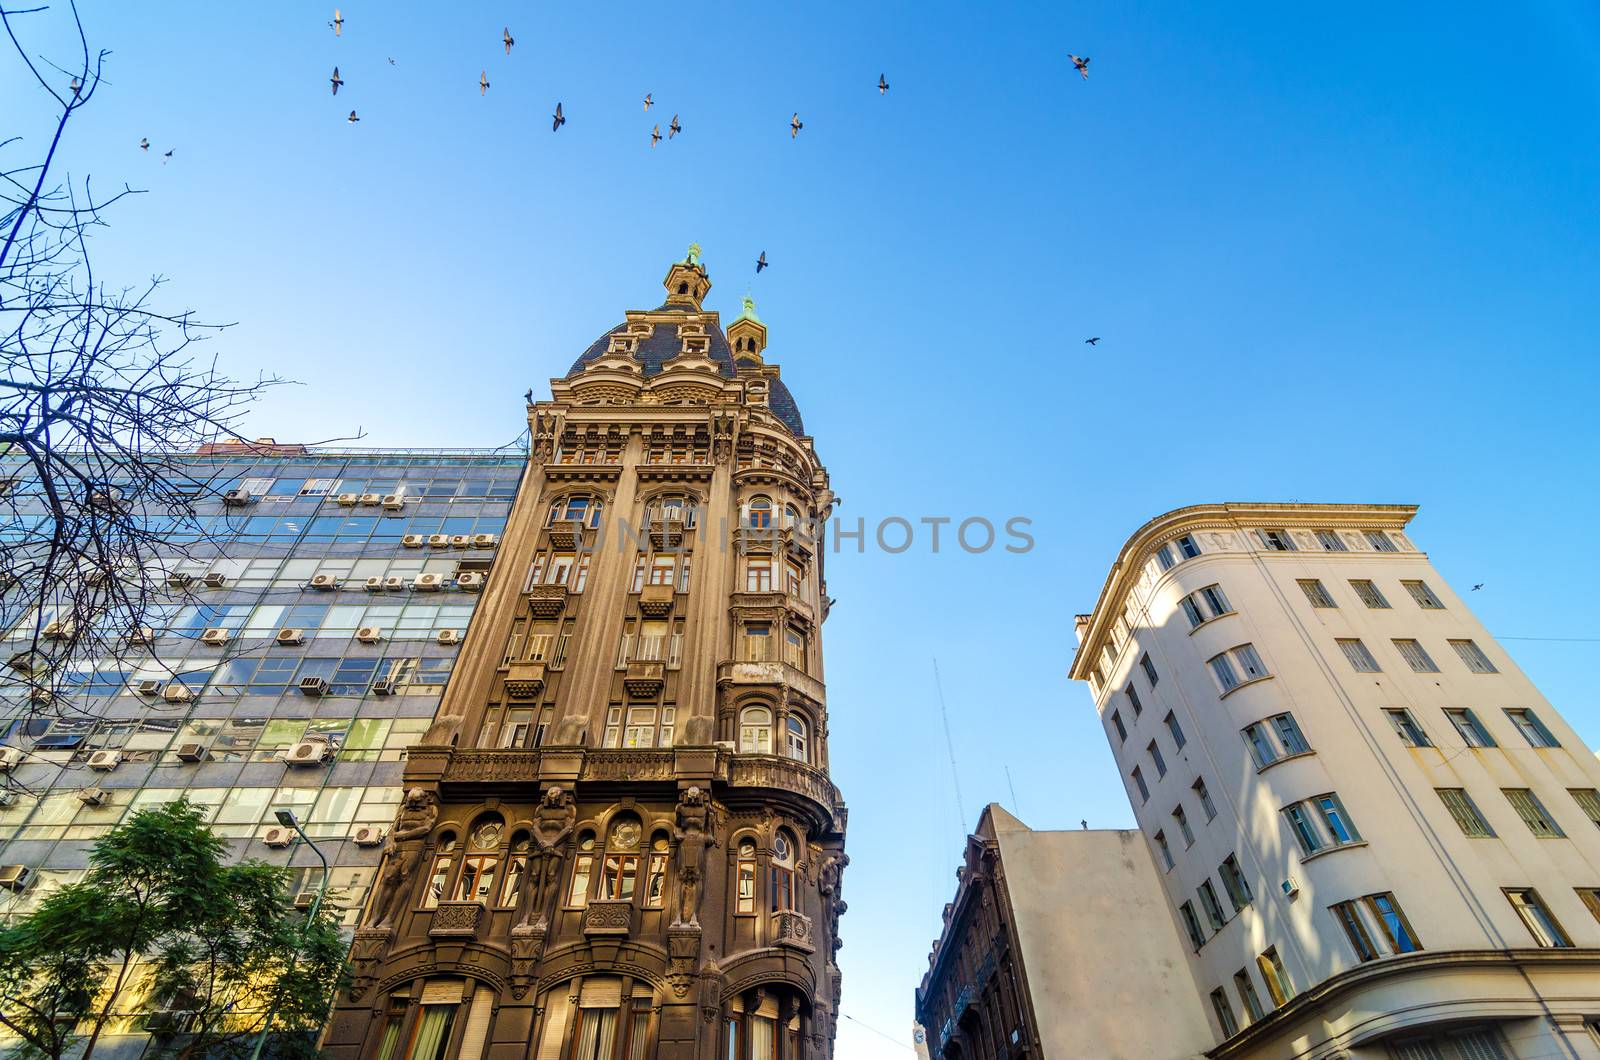 Old historic apartment building in San Telmo neighborhood of Buenos Aires, Argentina with birds flying above